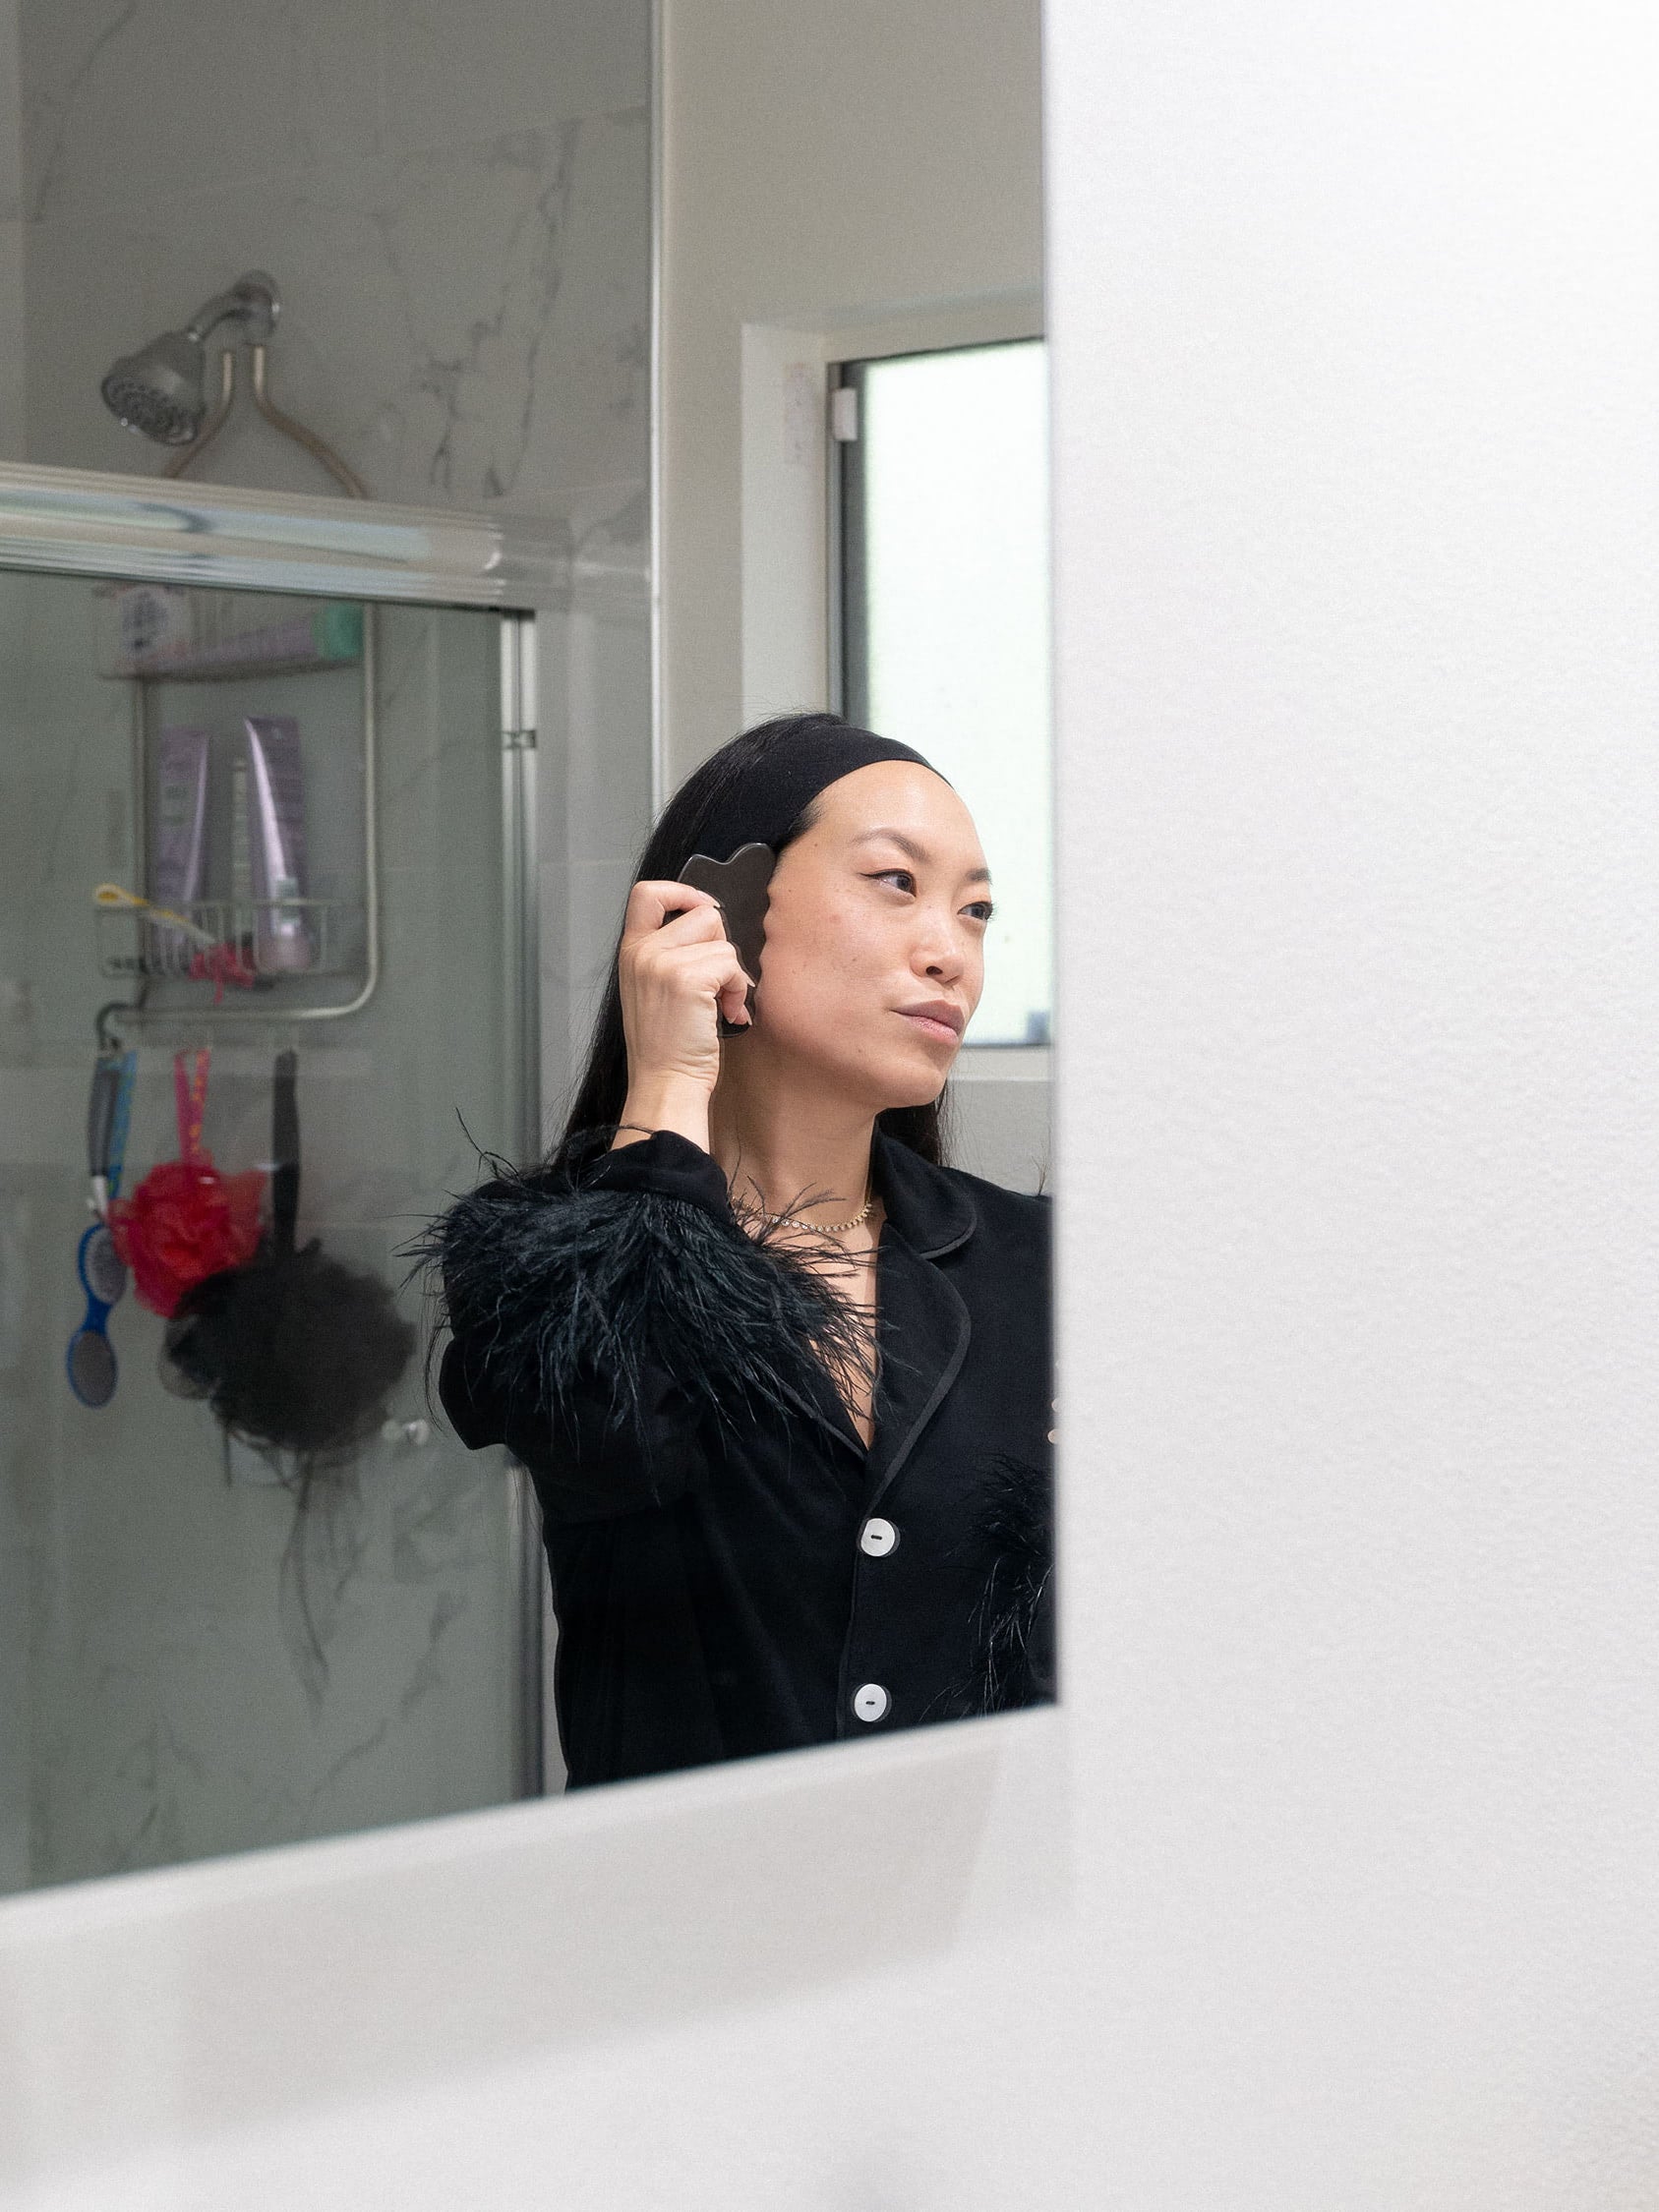 The publicist and founder of SixTen PR, Jen Woodward looking herself in the mirror while working on her skincare